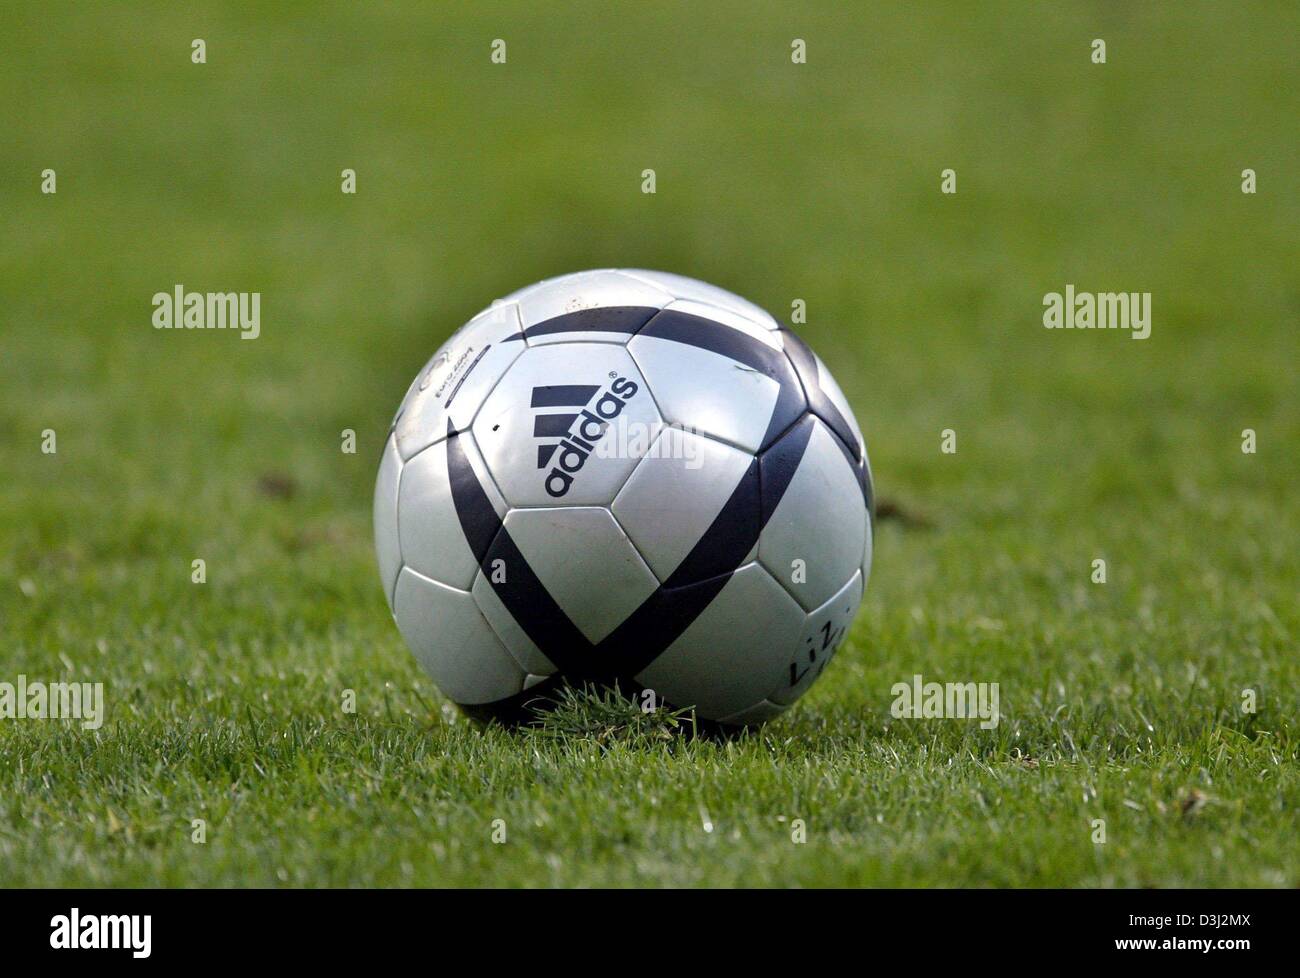 The new Roteiro football developed by adidas sports company for the  upcoming Euro 2004 European Soccer Championship in Portugal, lies on the  lawn 7 February 2004 at the Leverkusen BayArena. The ball